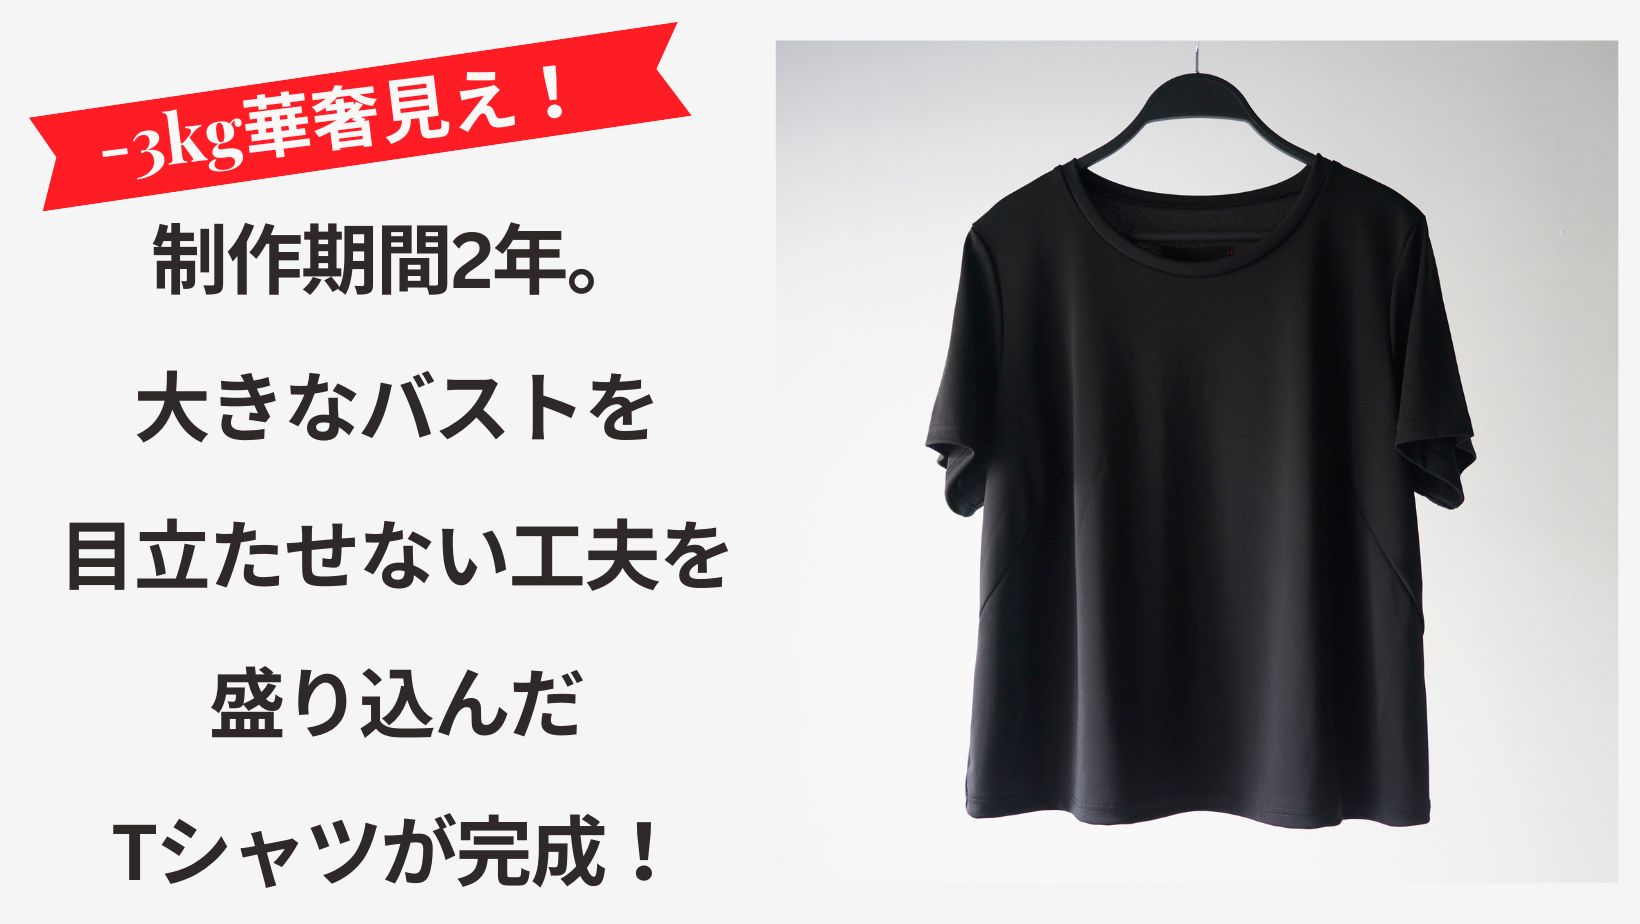 −3kg見え Tシャツ